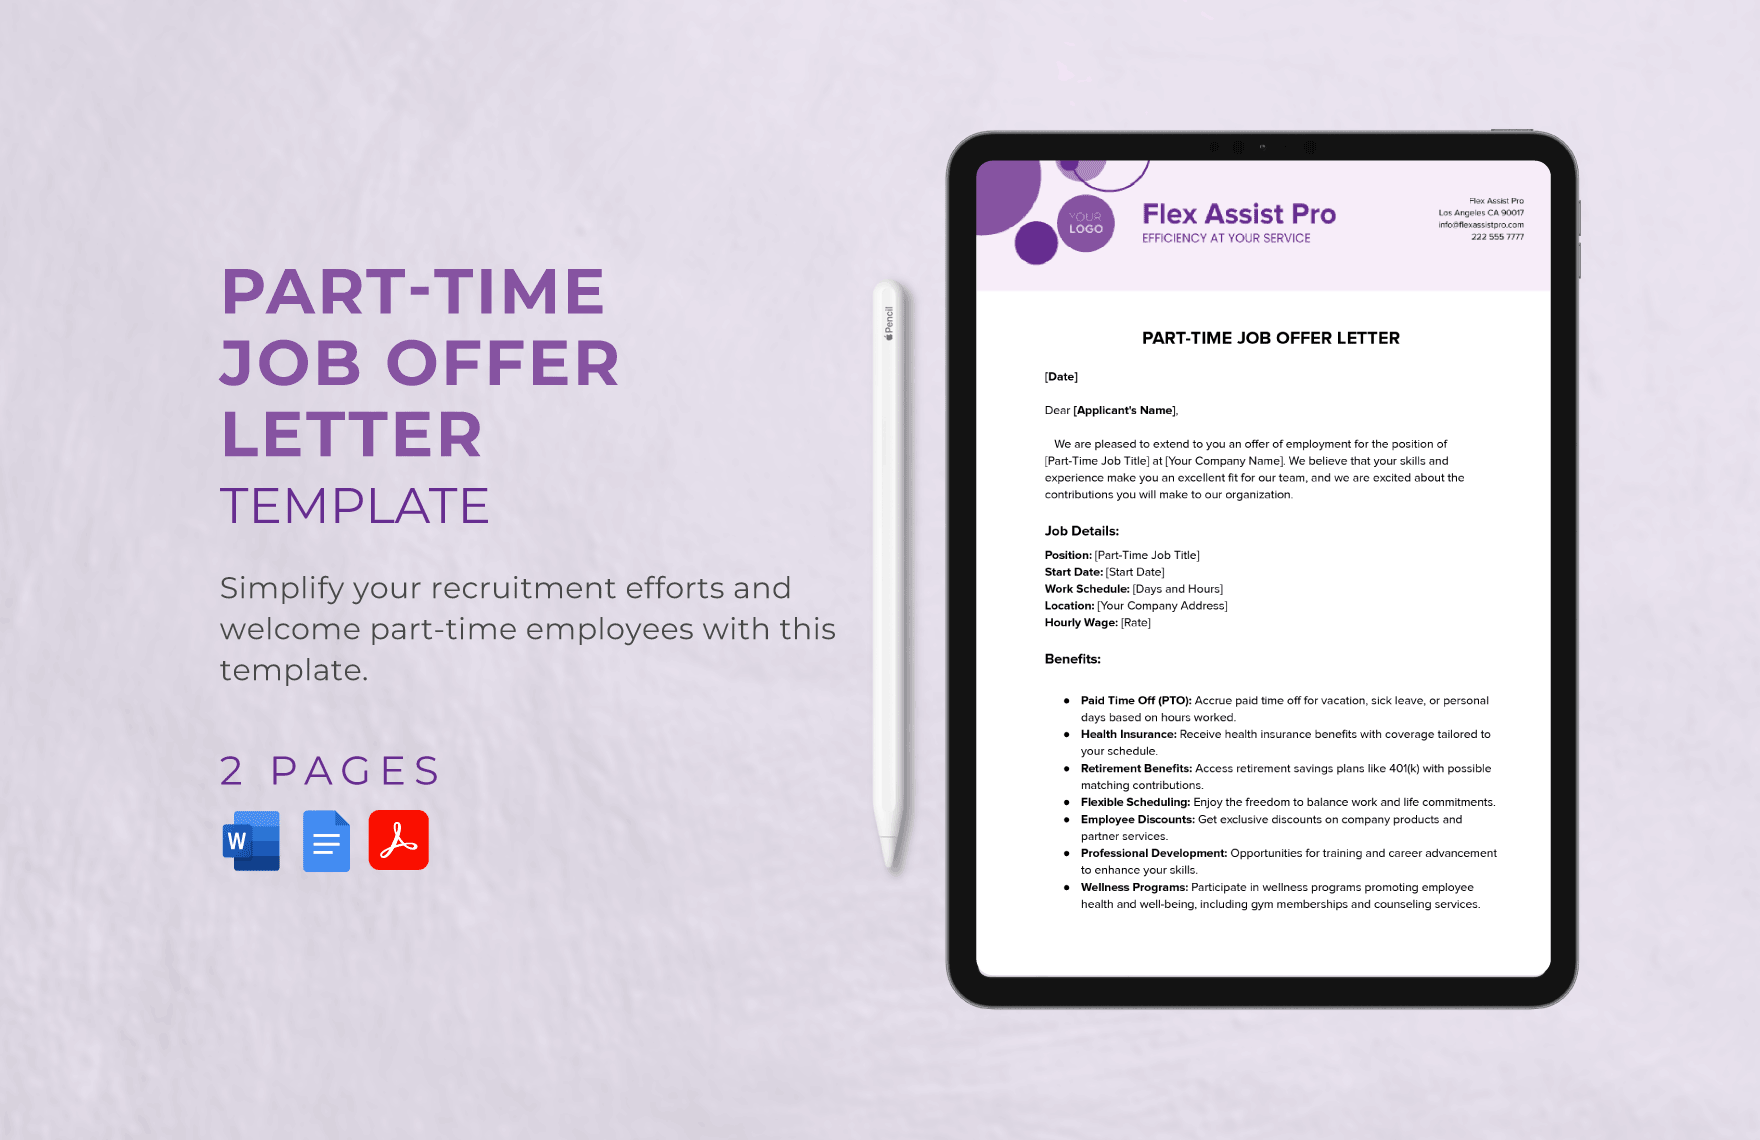 Part-Time Job Offer Letter Template in Word, Google Docs, PDF